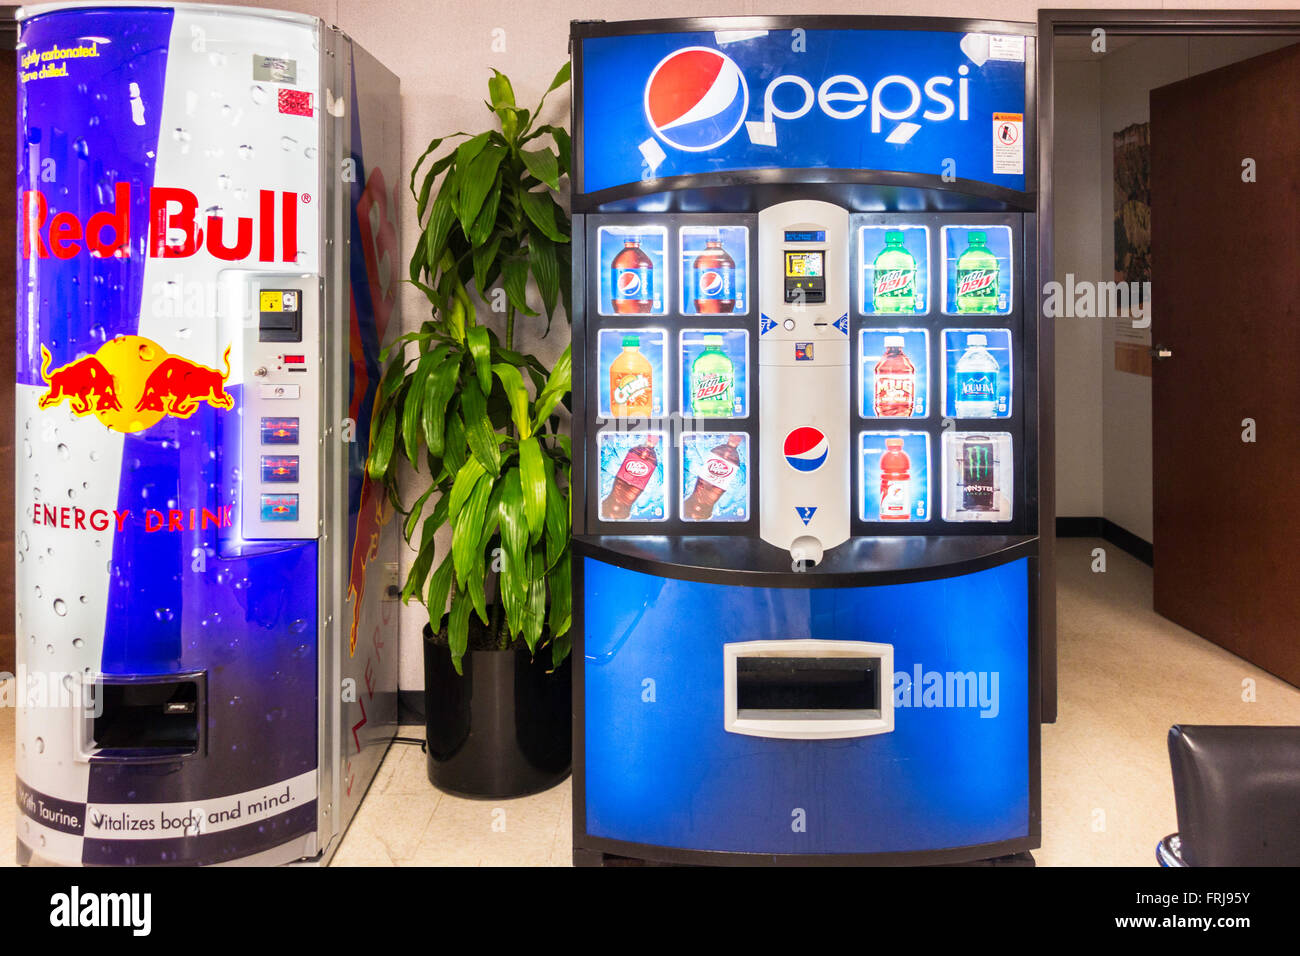 Red Bull and Pepsi machines offering cold energy drinks and soft drinks in Oklahoma, USA. Stock Photo